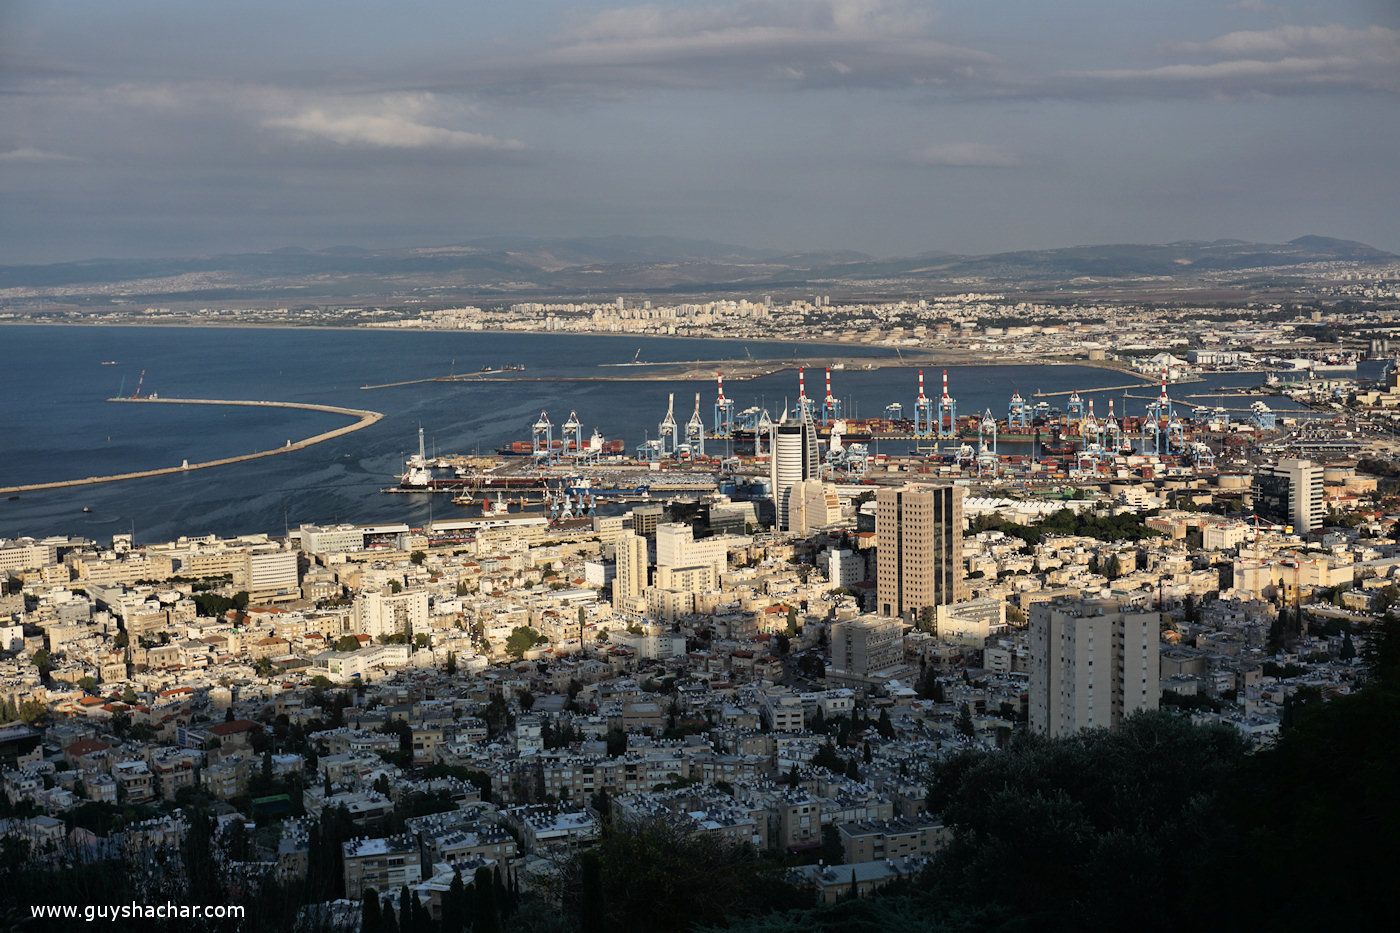 A new port is under construction on a crucial spot of Haifa Bay